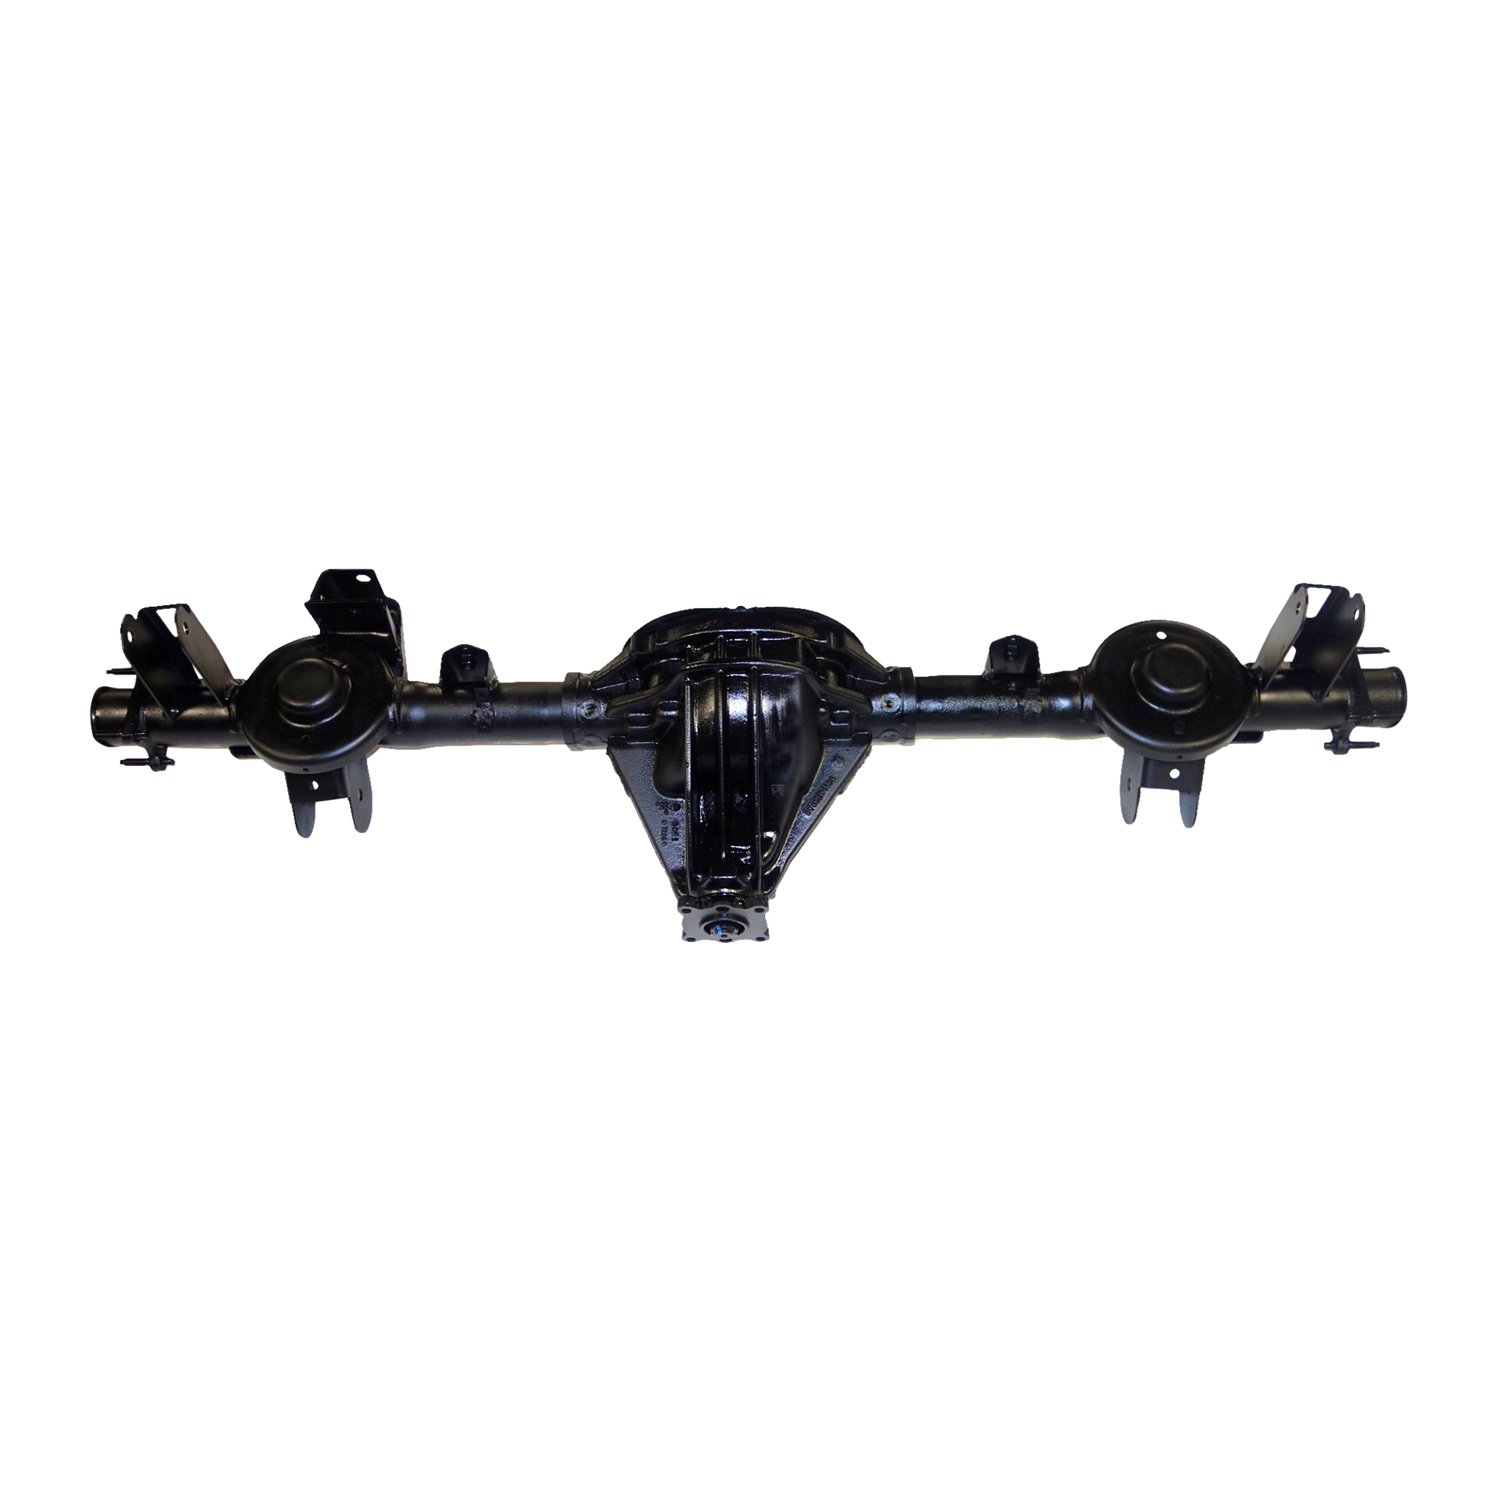 Remanufactured Complete Axle Assembly for Chy 8.25" 06-07 Liberty 3.73 , Posi LSD